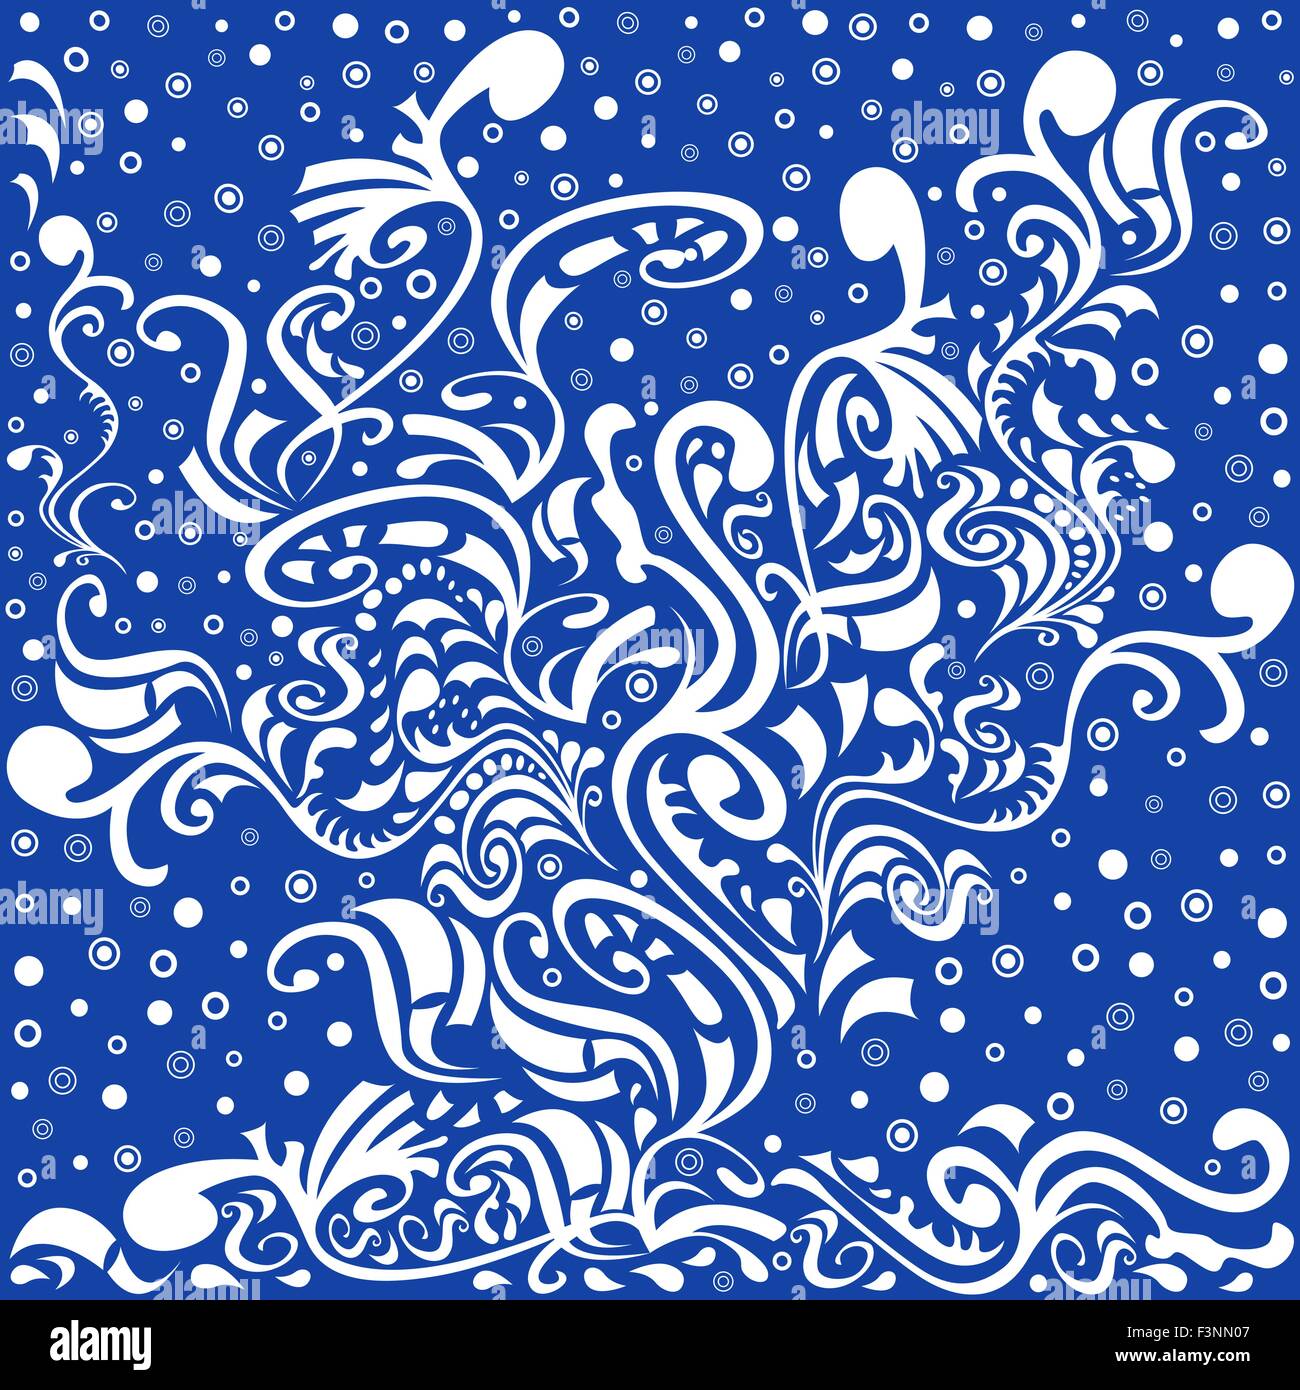 Abstract floral pattern in blue and white colors, hand drawing vector illustration Stock Vector